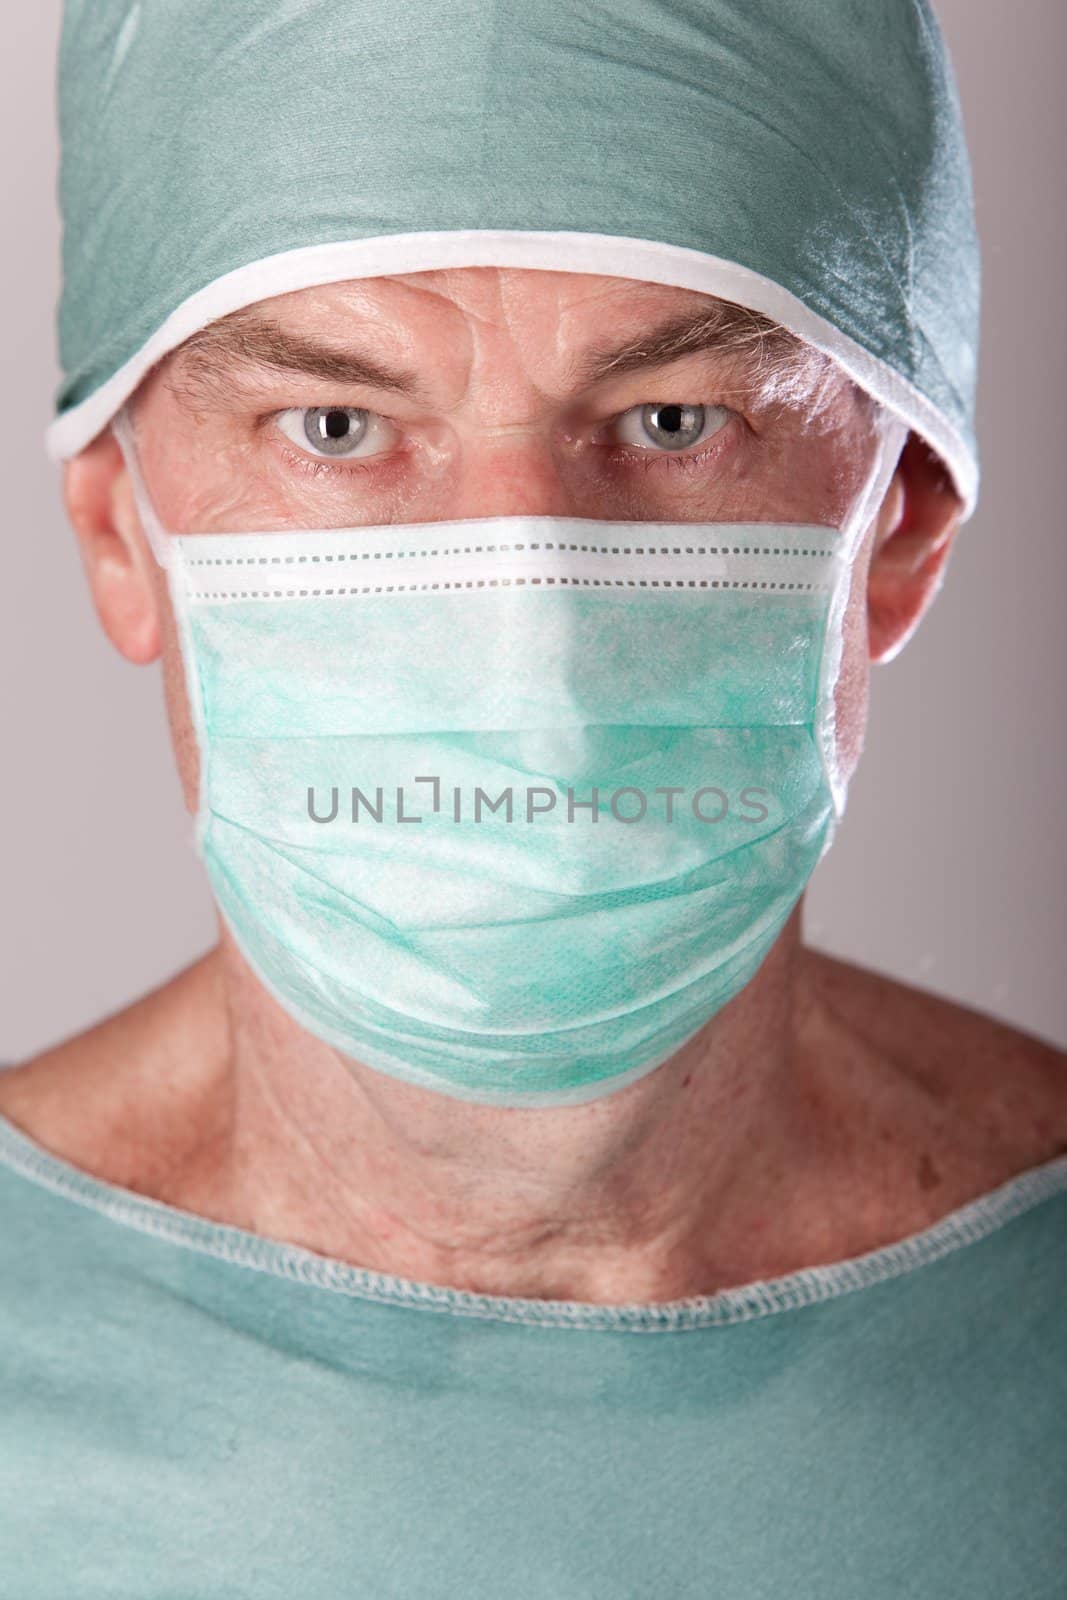 A 60 year old surgeon on a gray background.